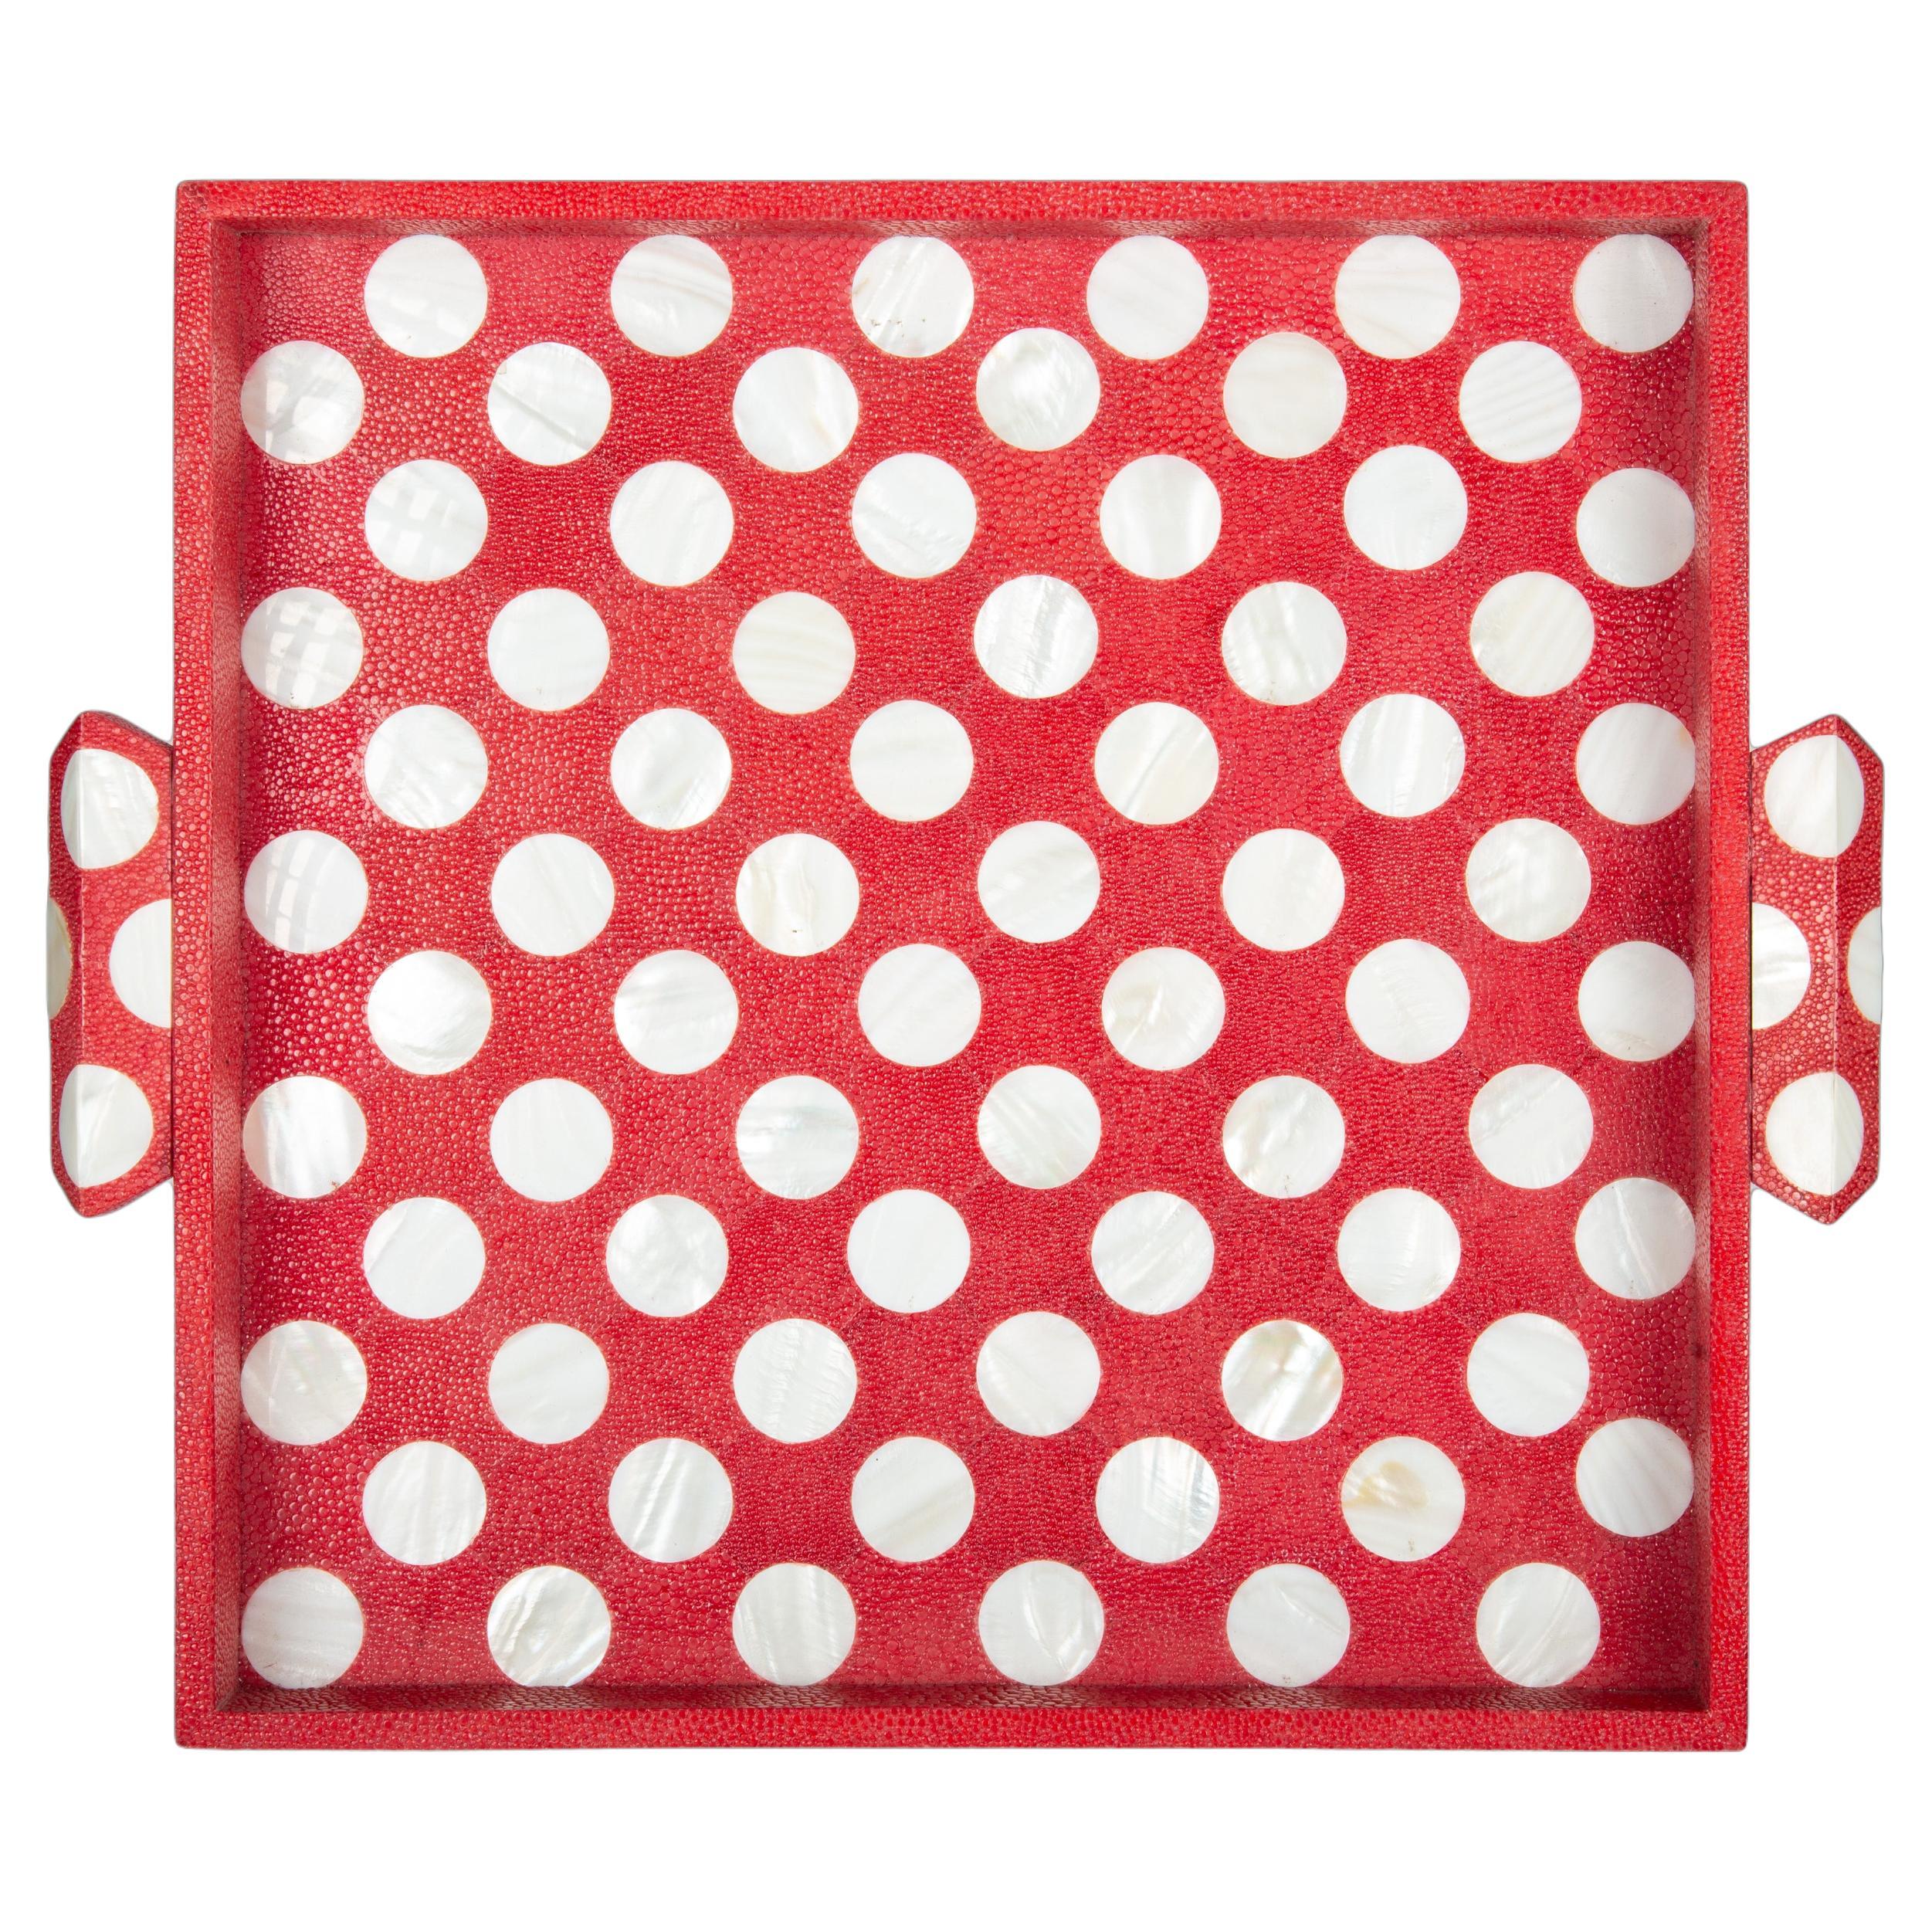 Red Polka Dot Shagreen and Mother of Pearl Square Tray